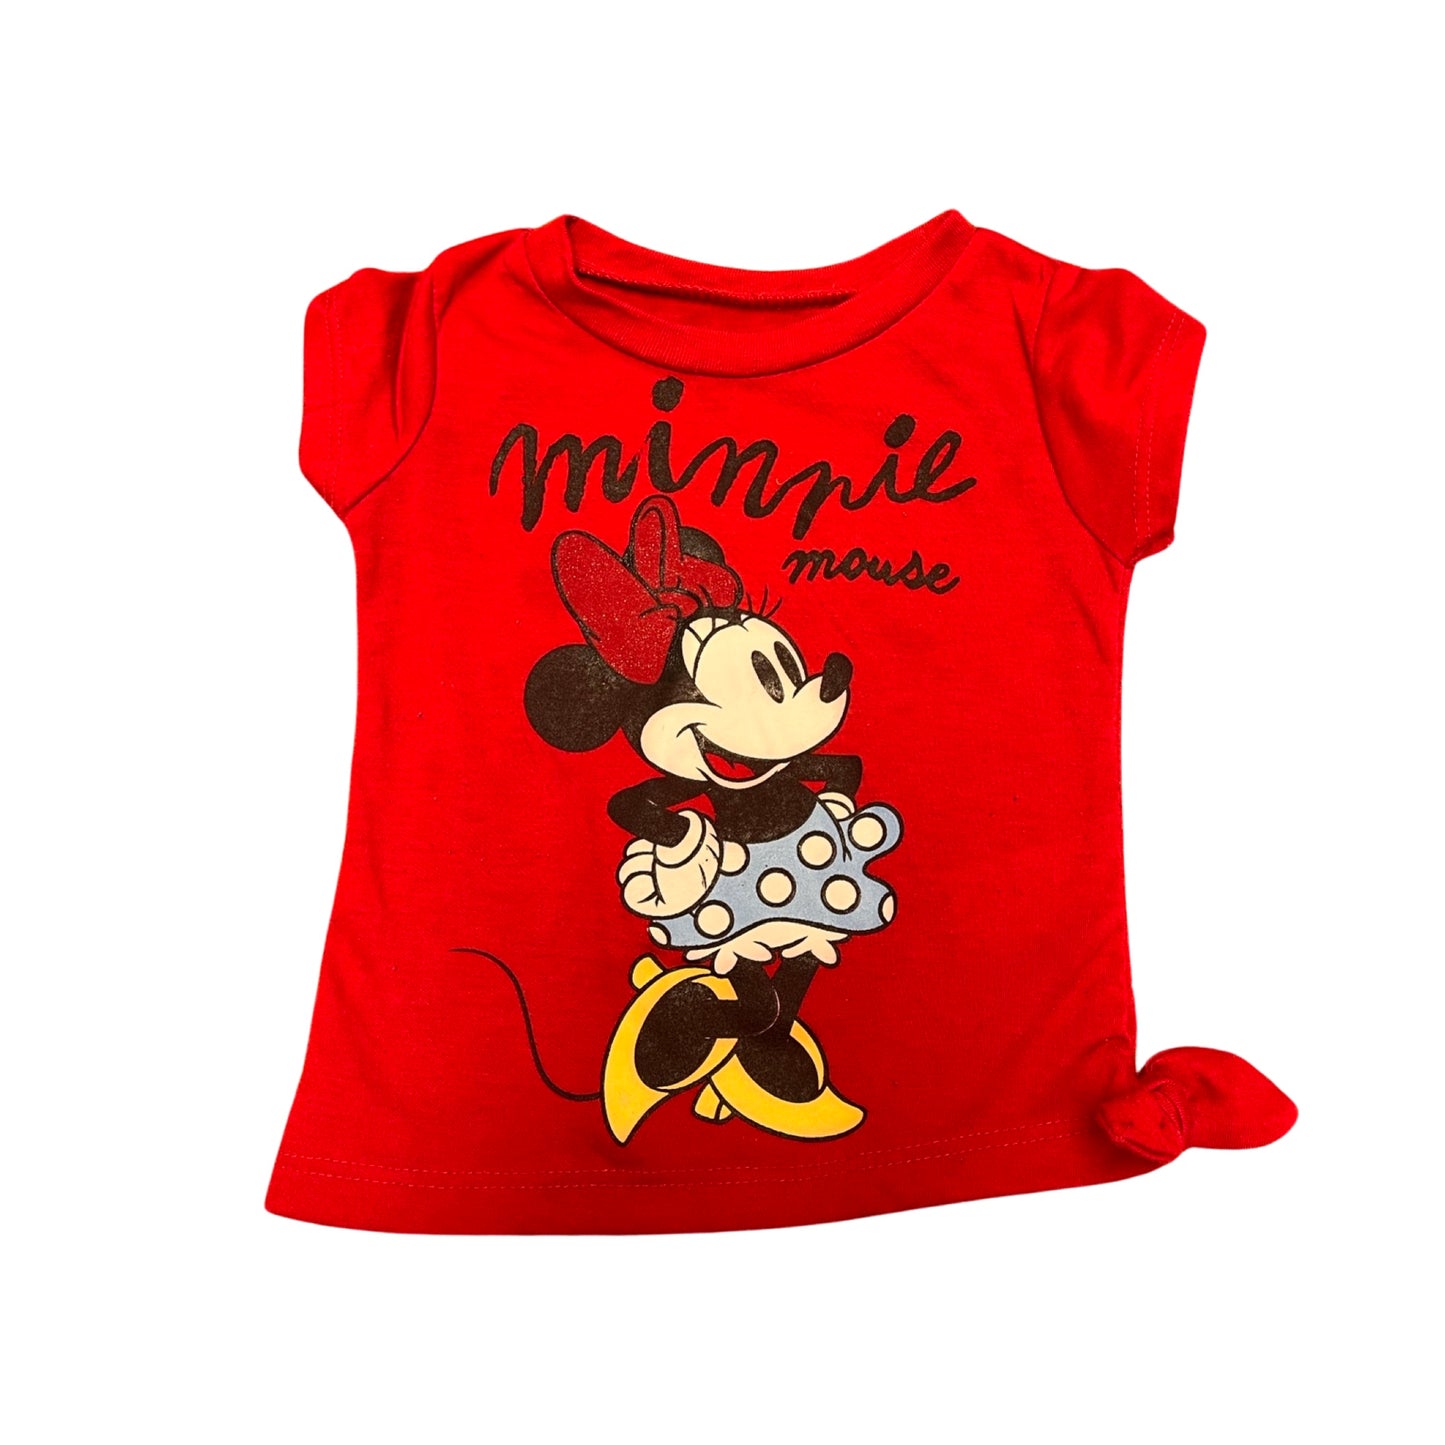 18m Red Minnie Mouse Tee